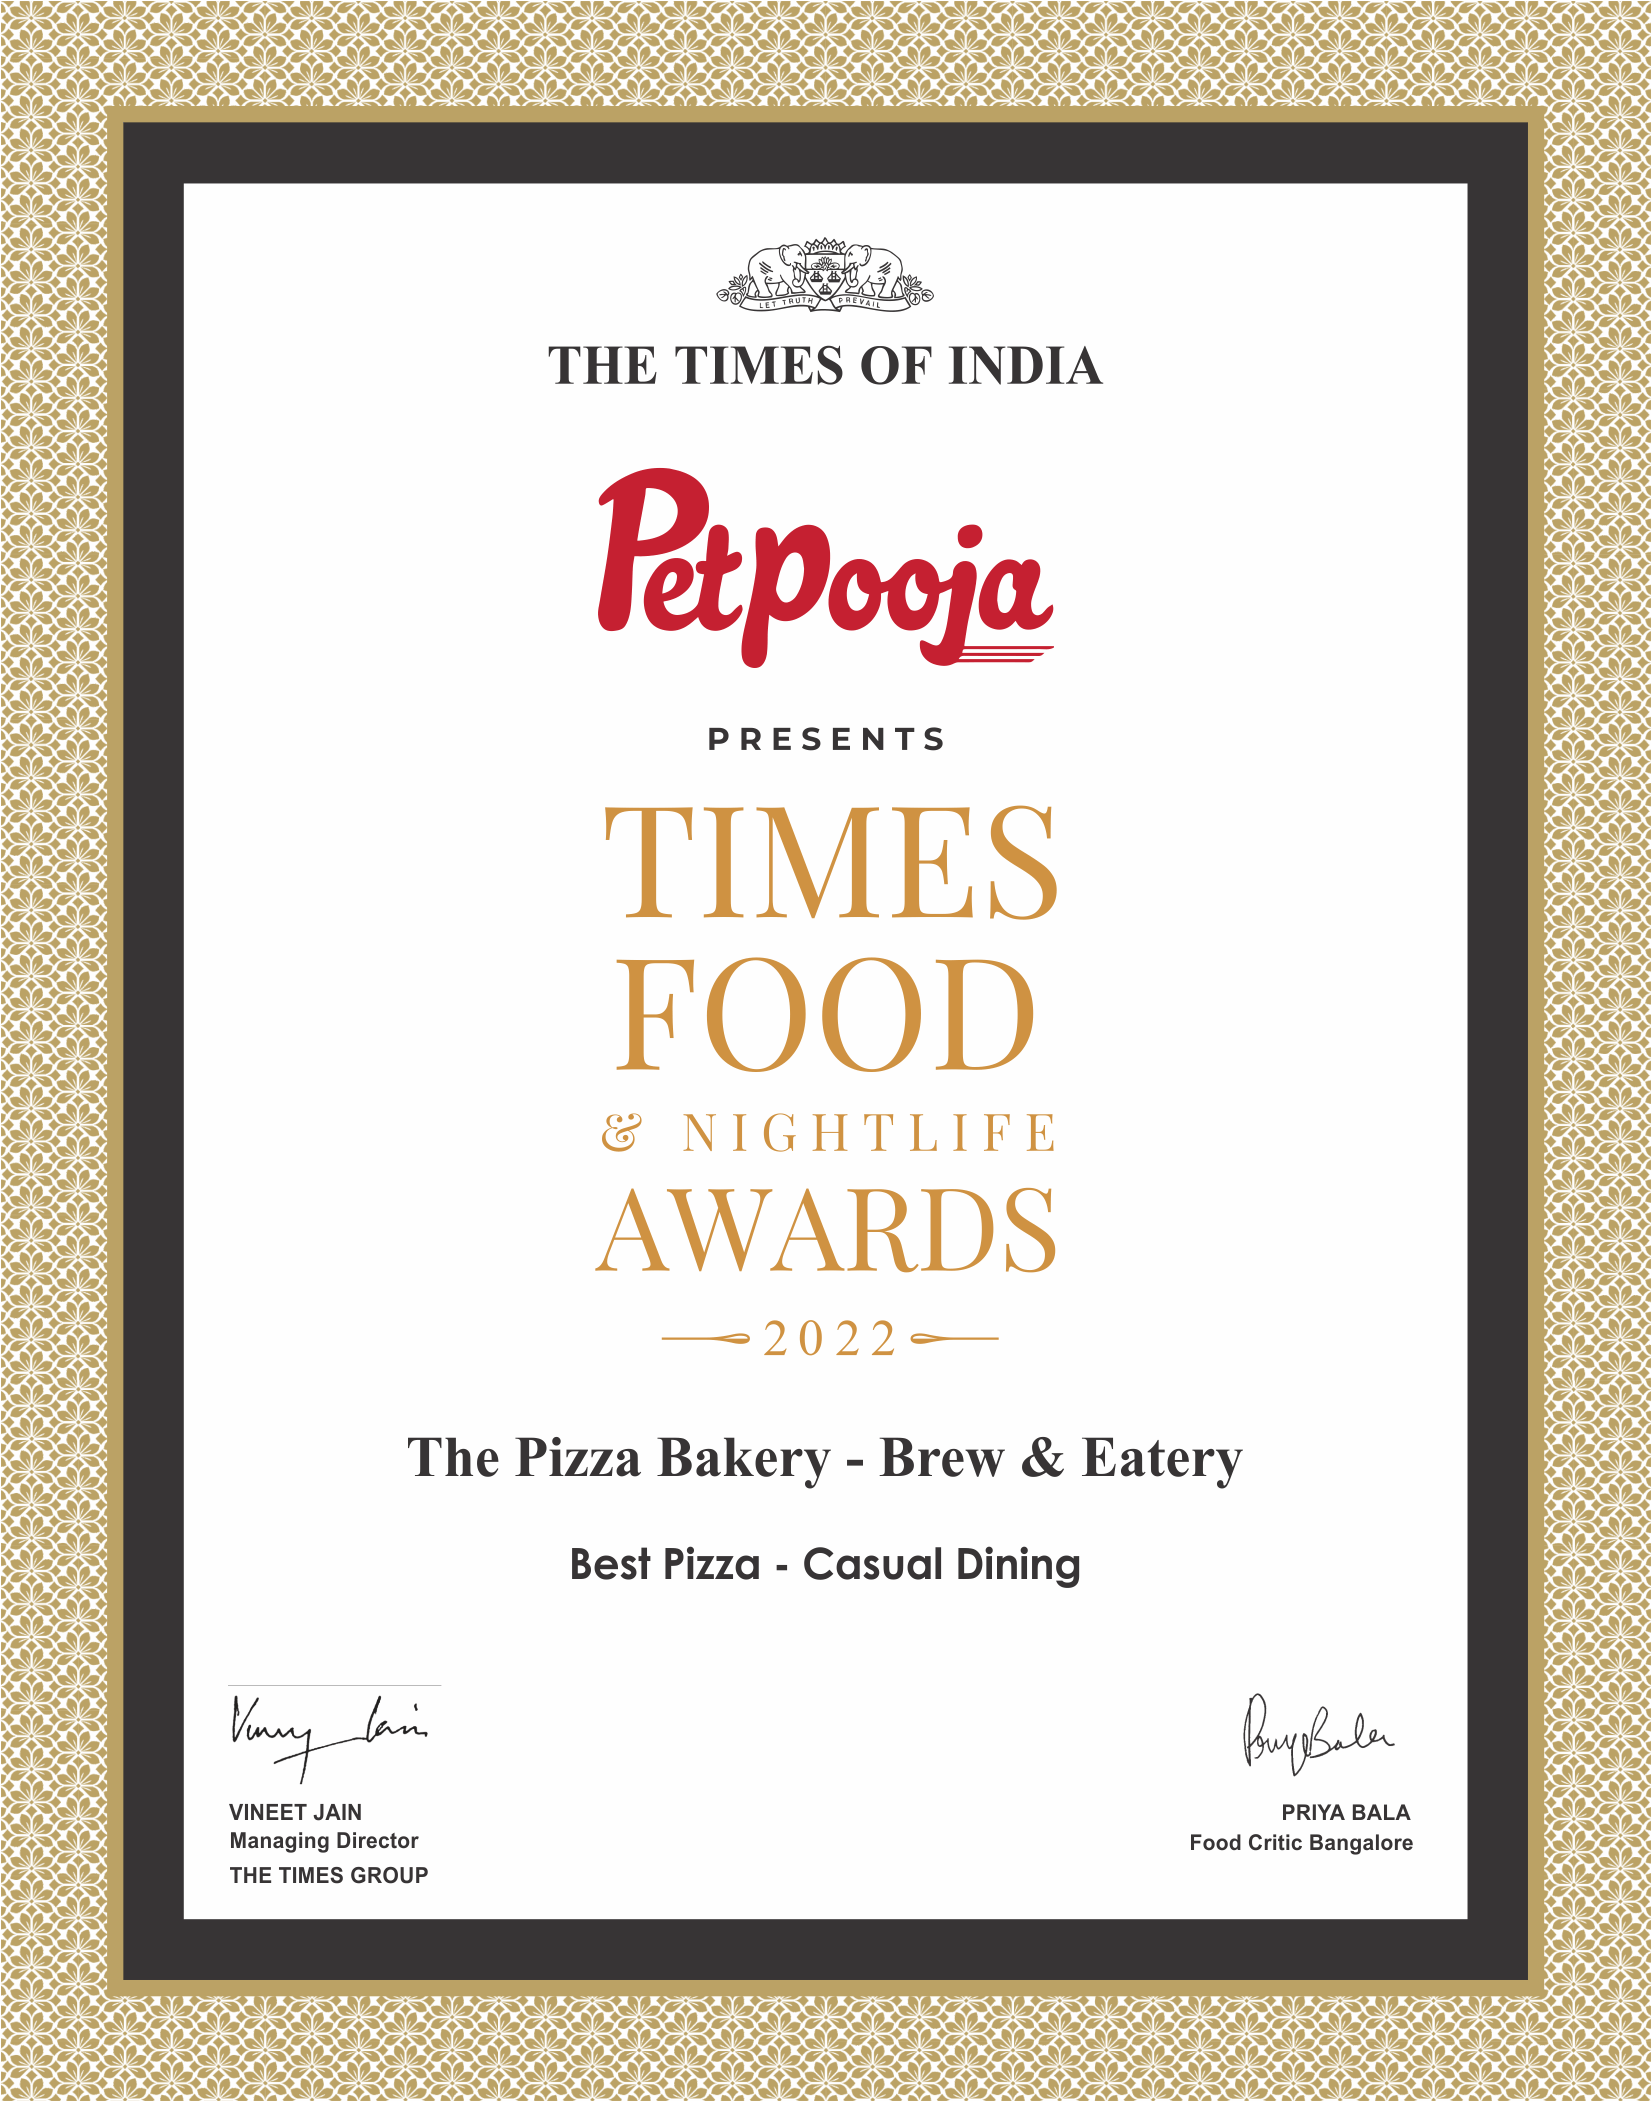 Times Food Awards 2022 – Best Pizza